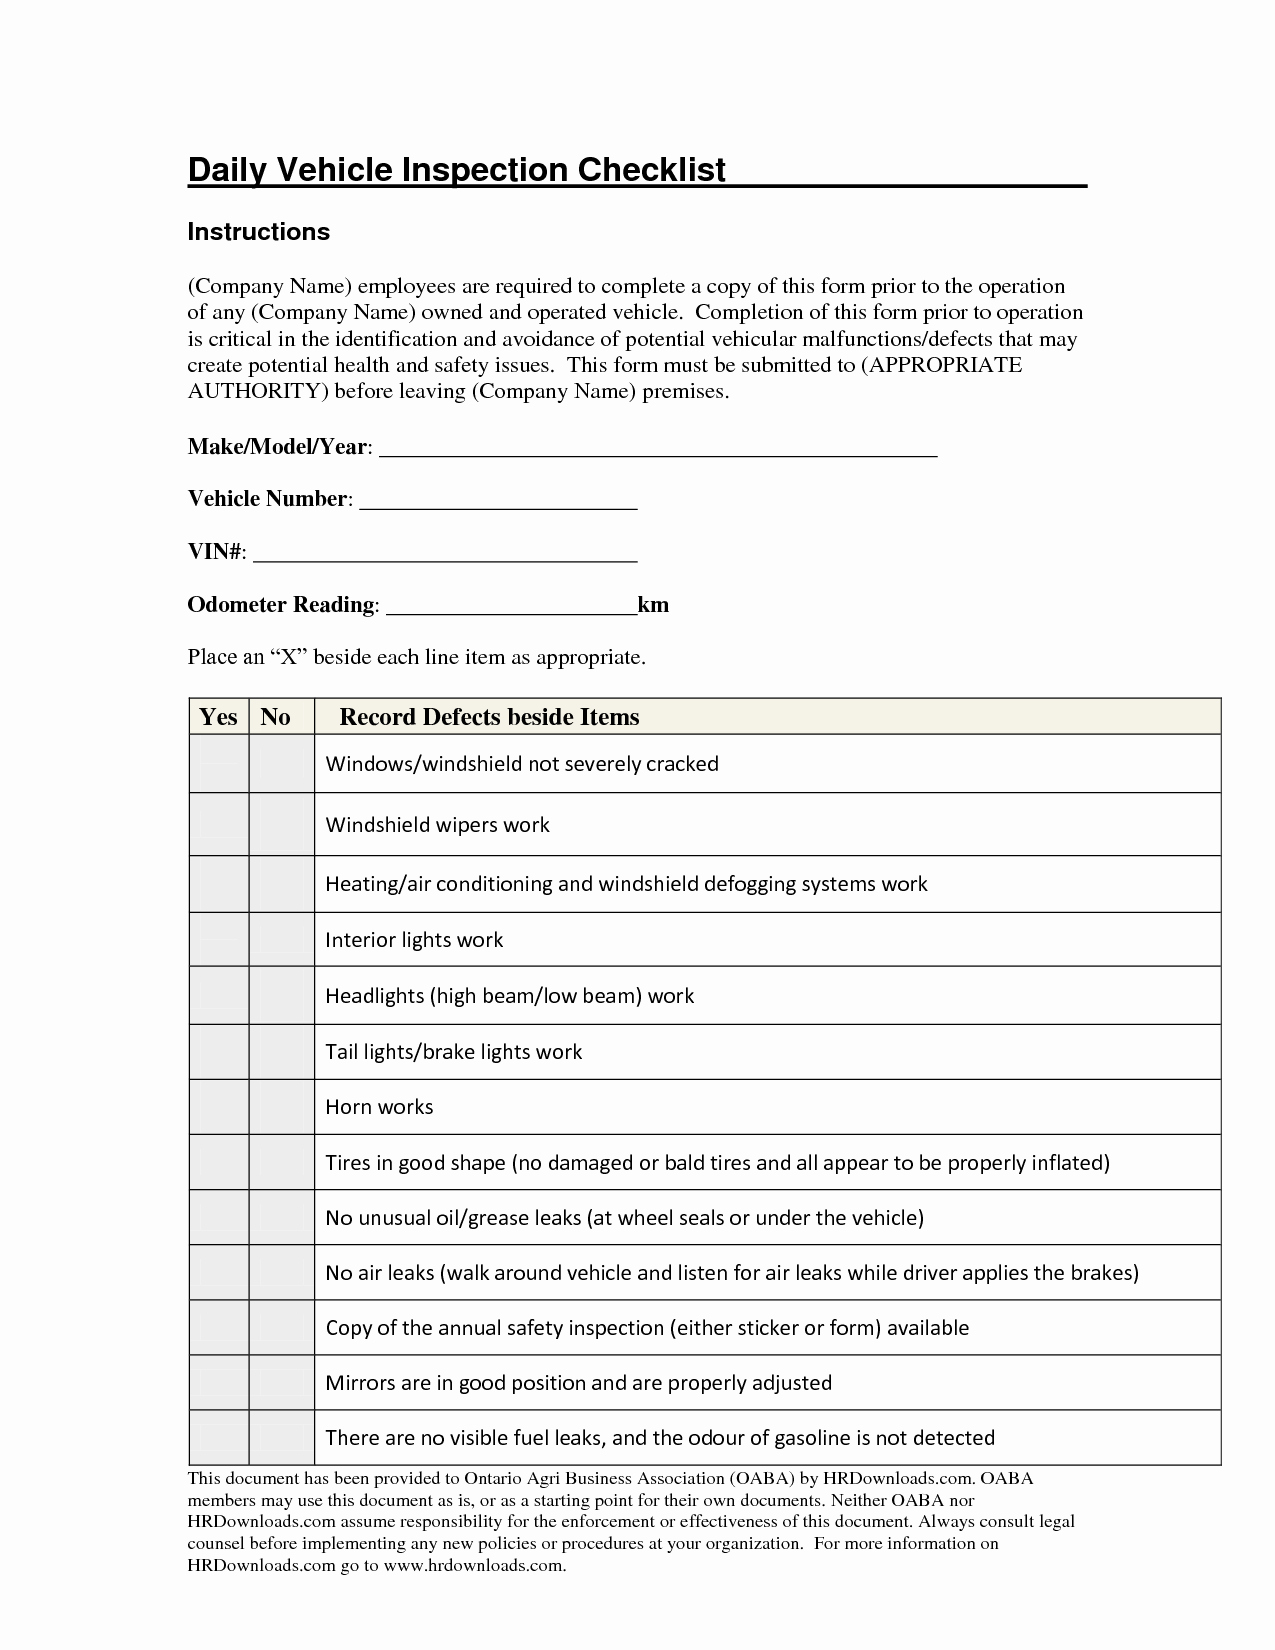 Daily Vehicle Inspection form Template Fresh Daily Vehicle Inspection Checklist form Image Gallery